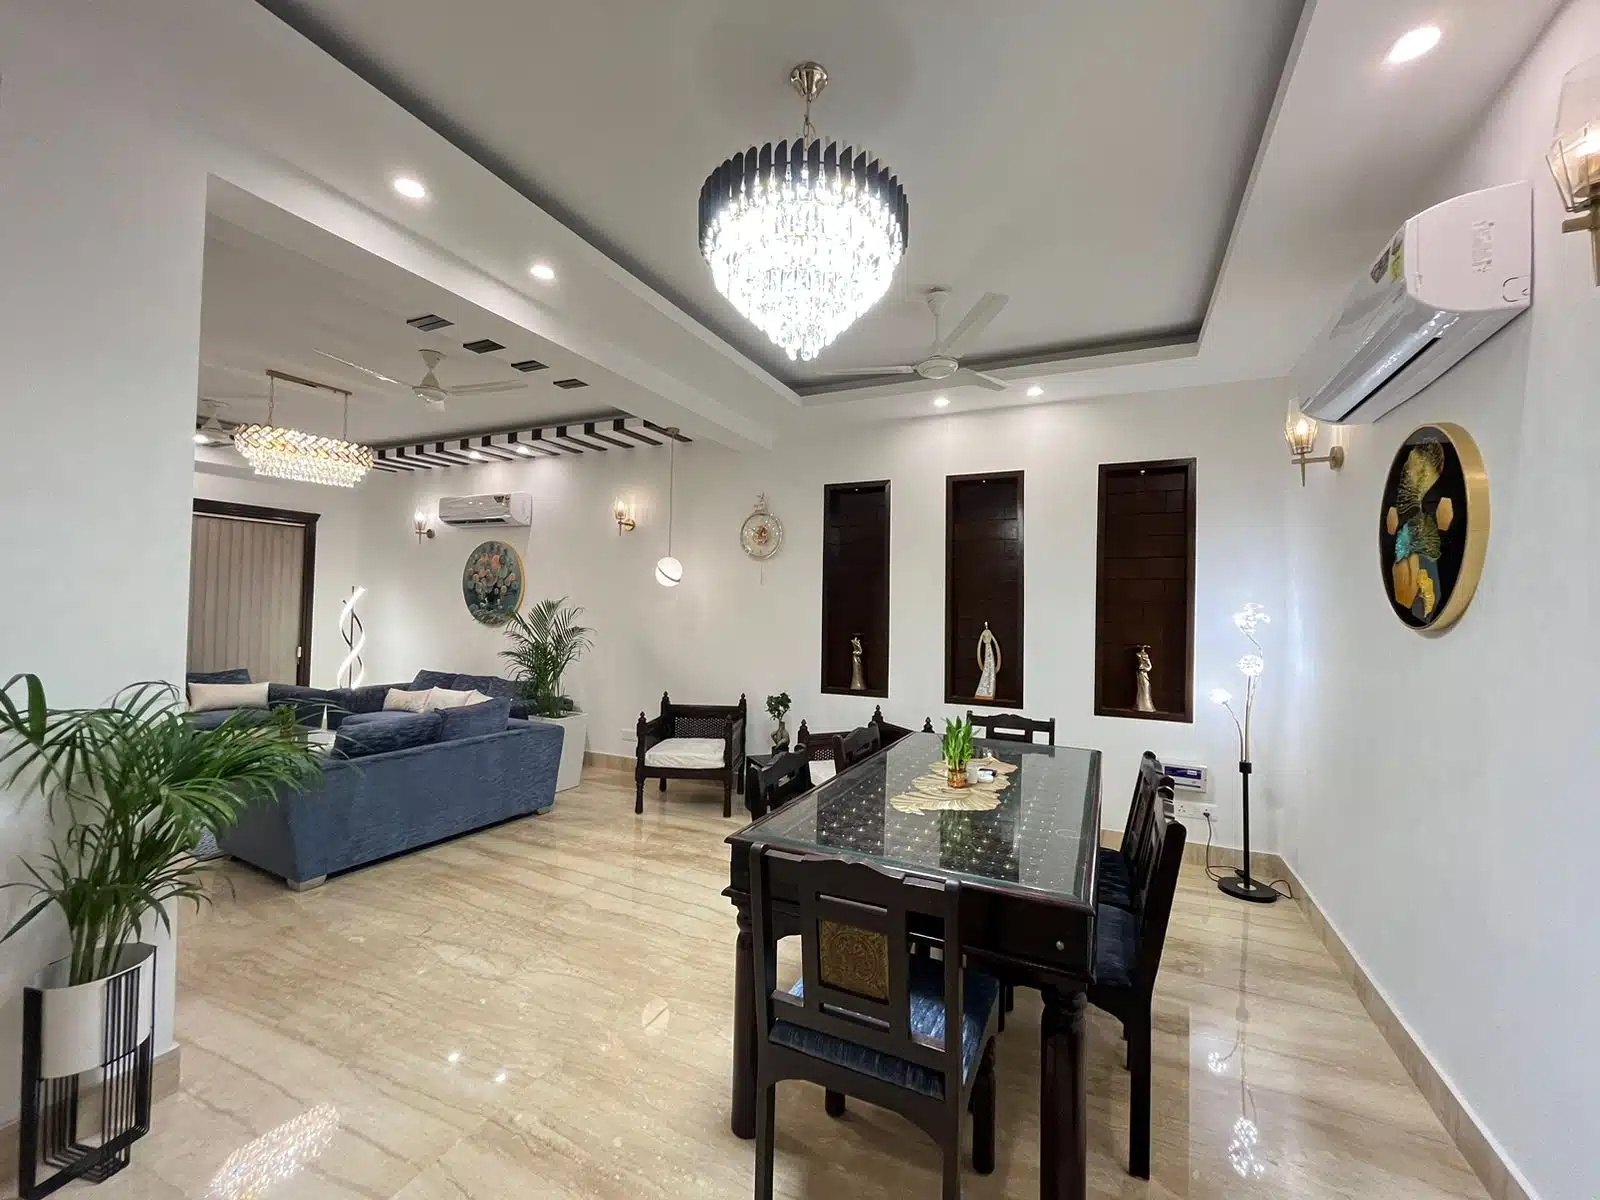 Dining room of 3 BHK Bedchambers Service Apartment SOuth Extension